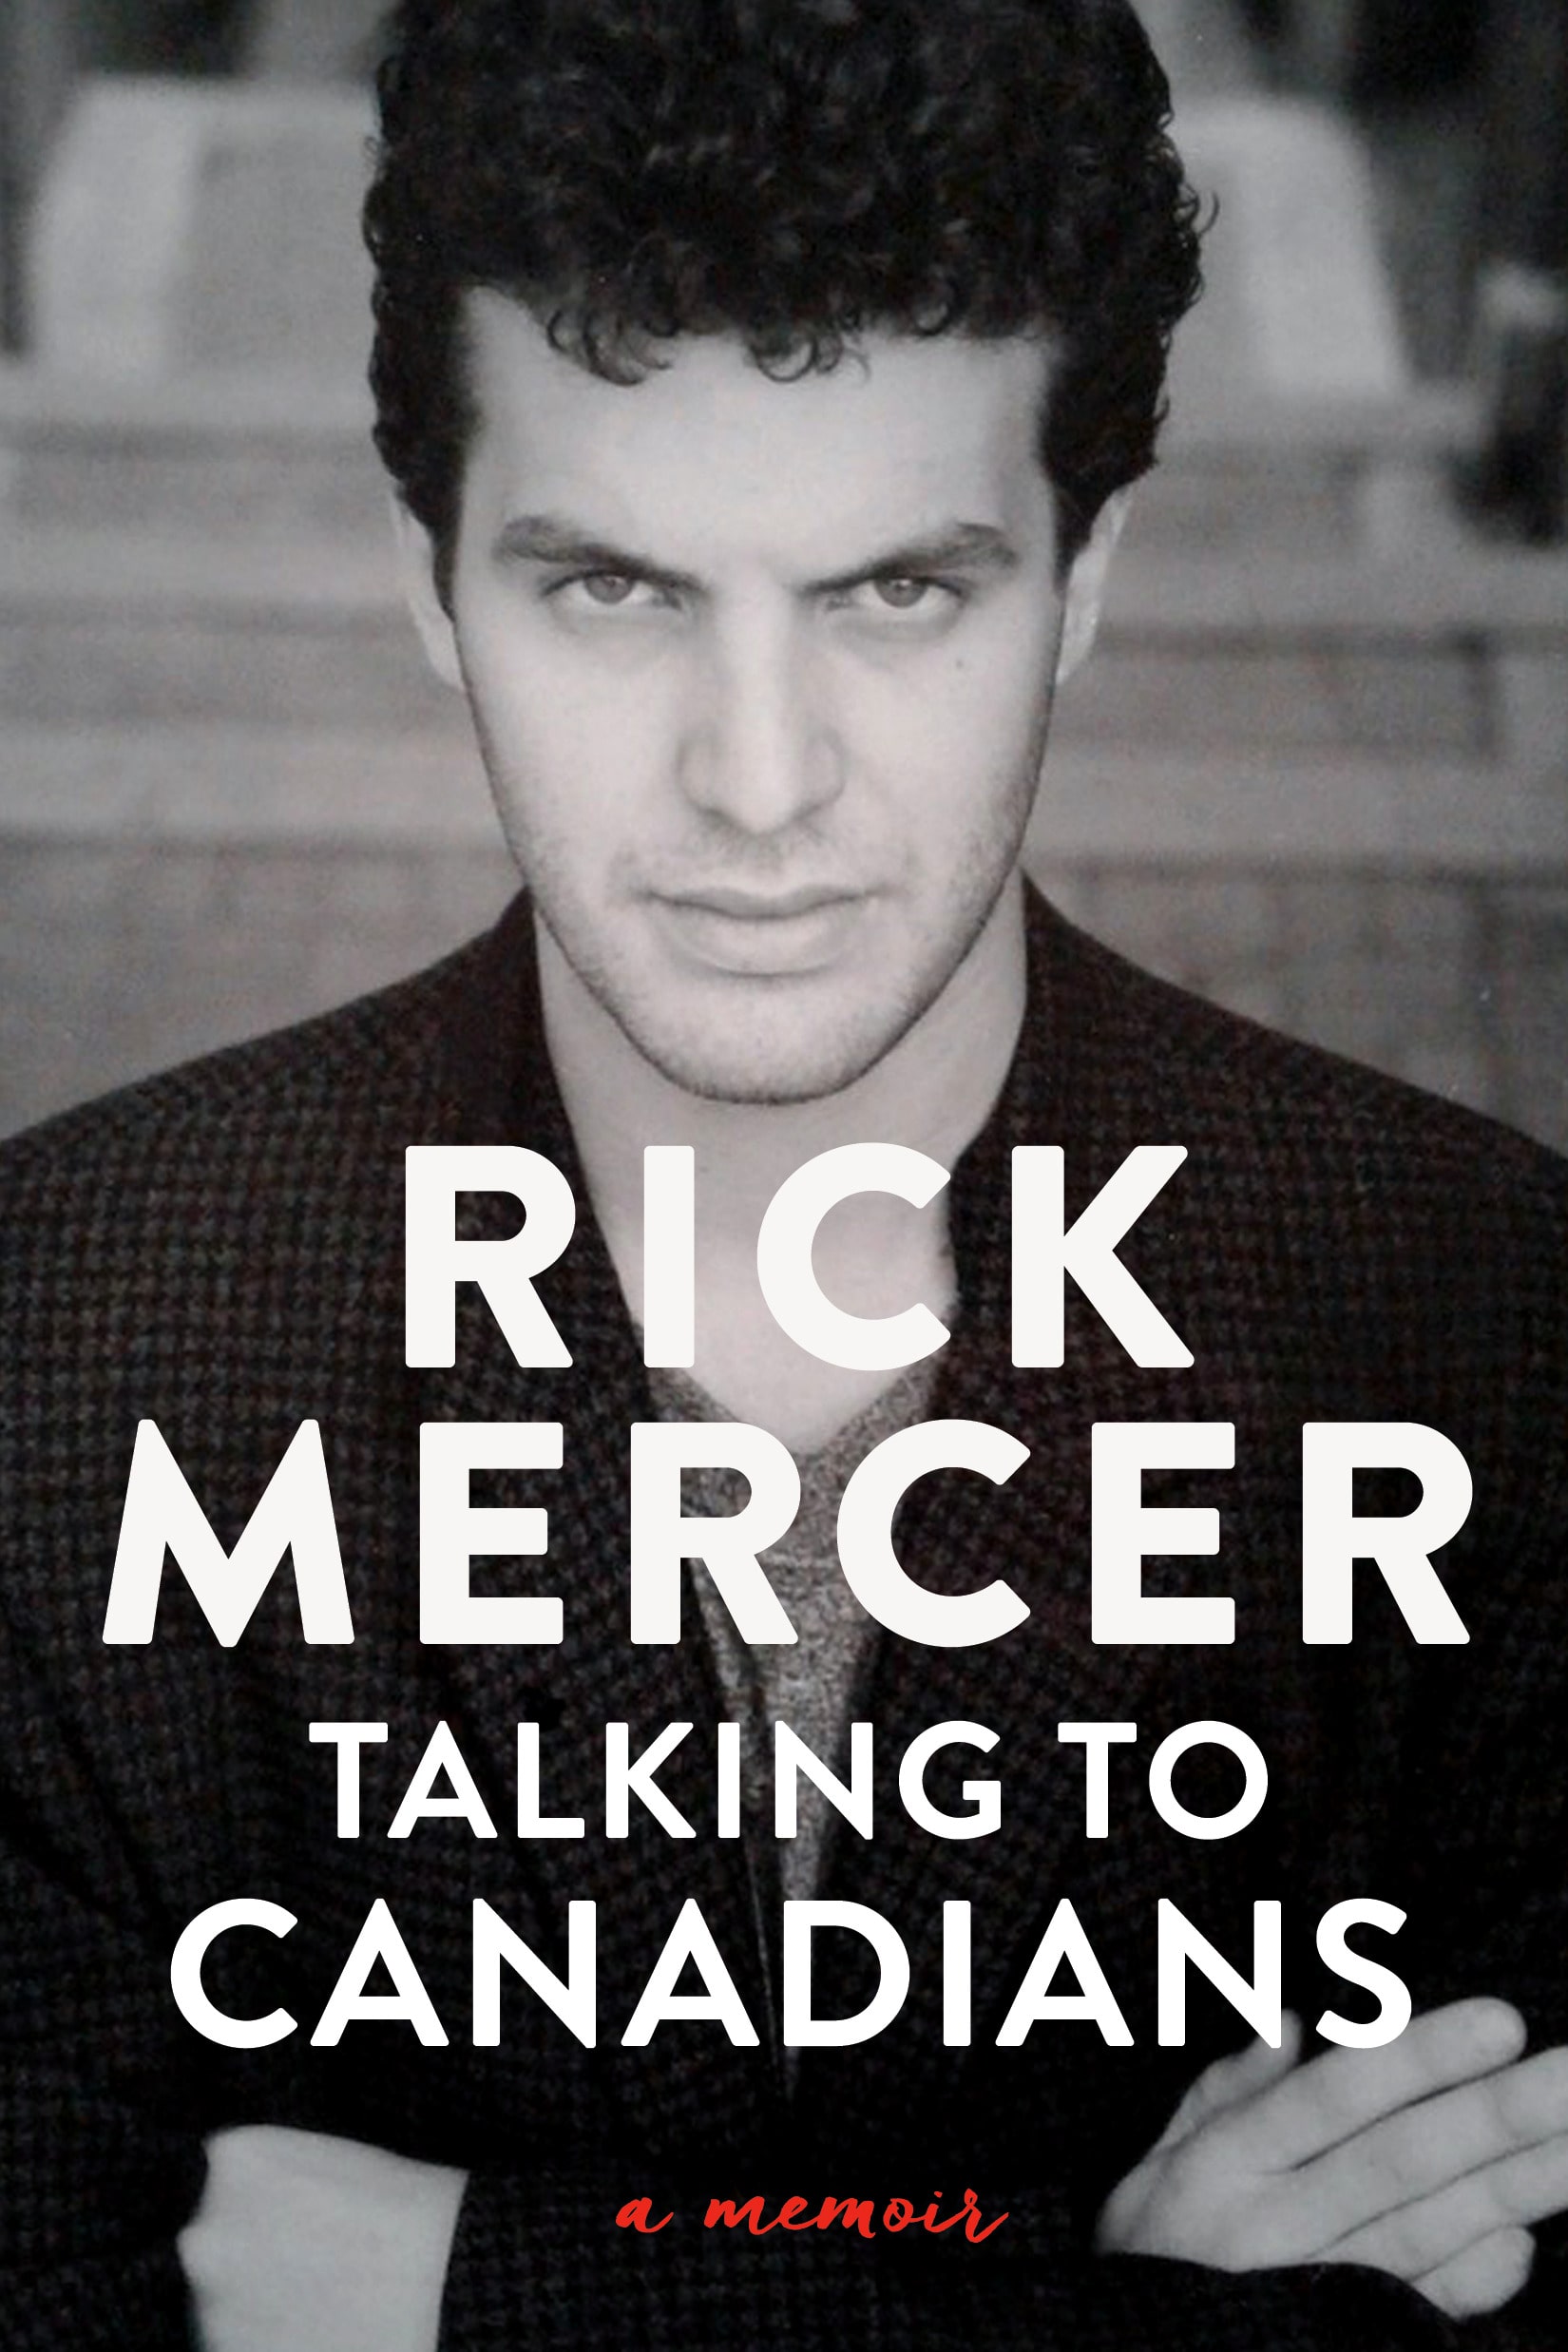 The book cover to Talking to Canadians.